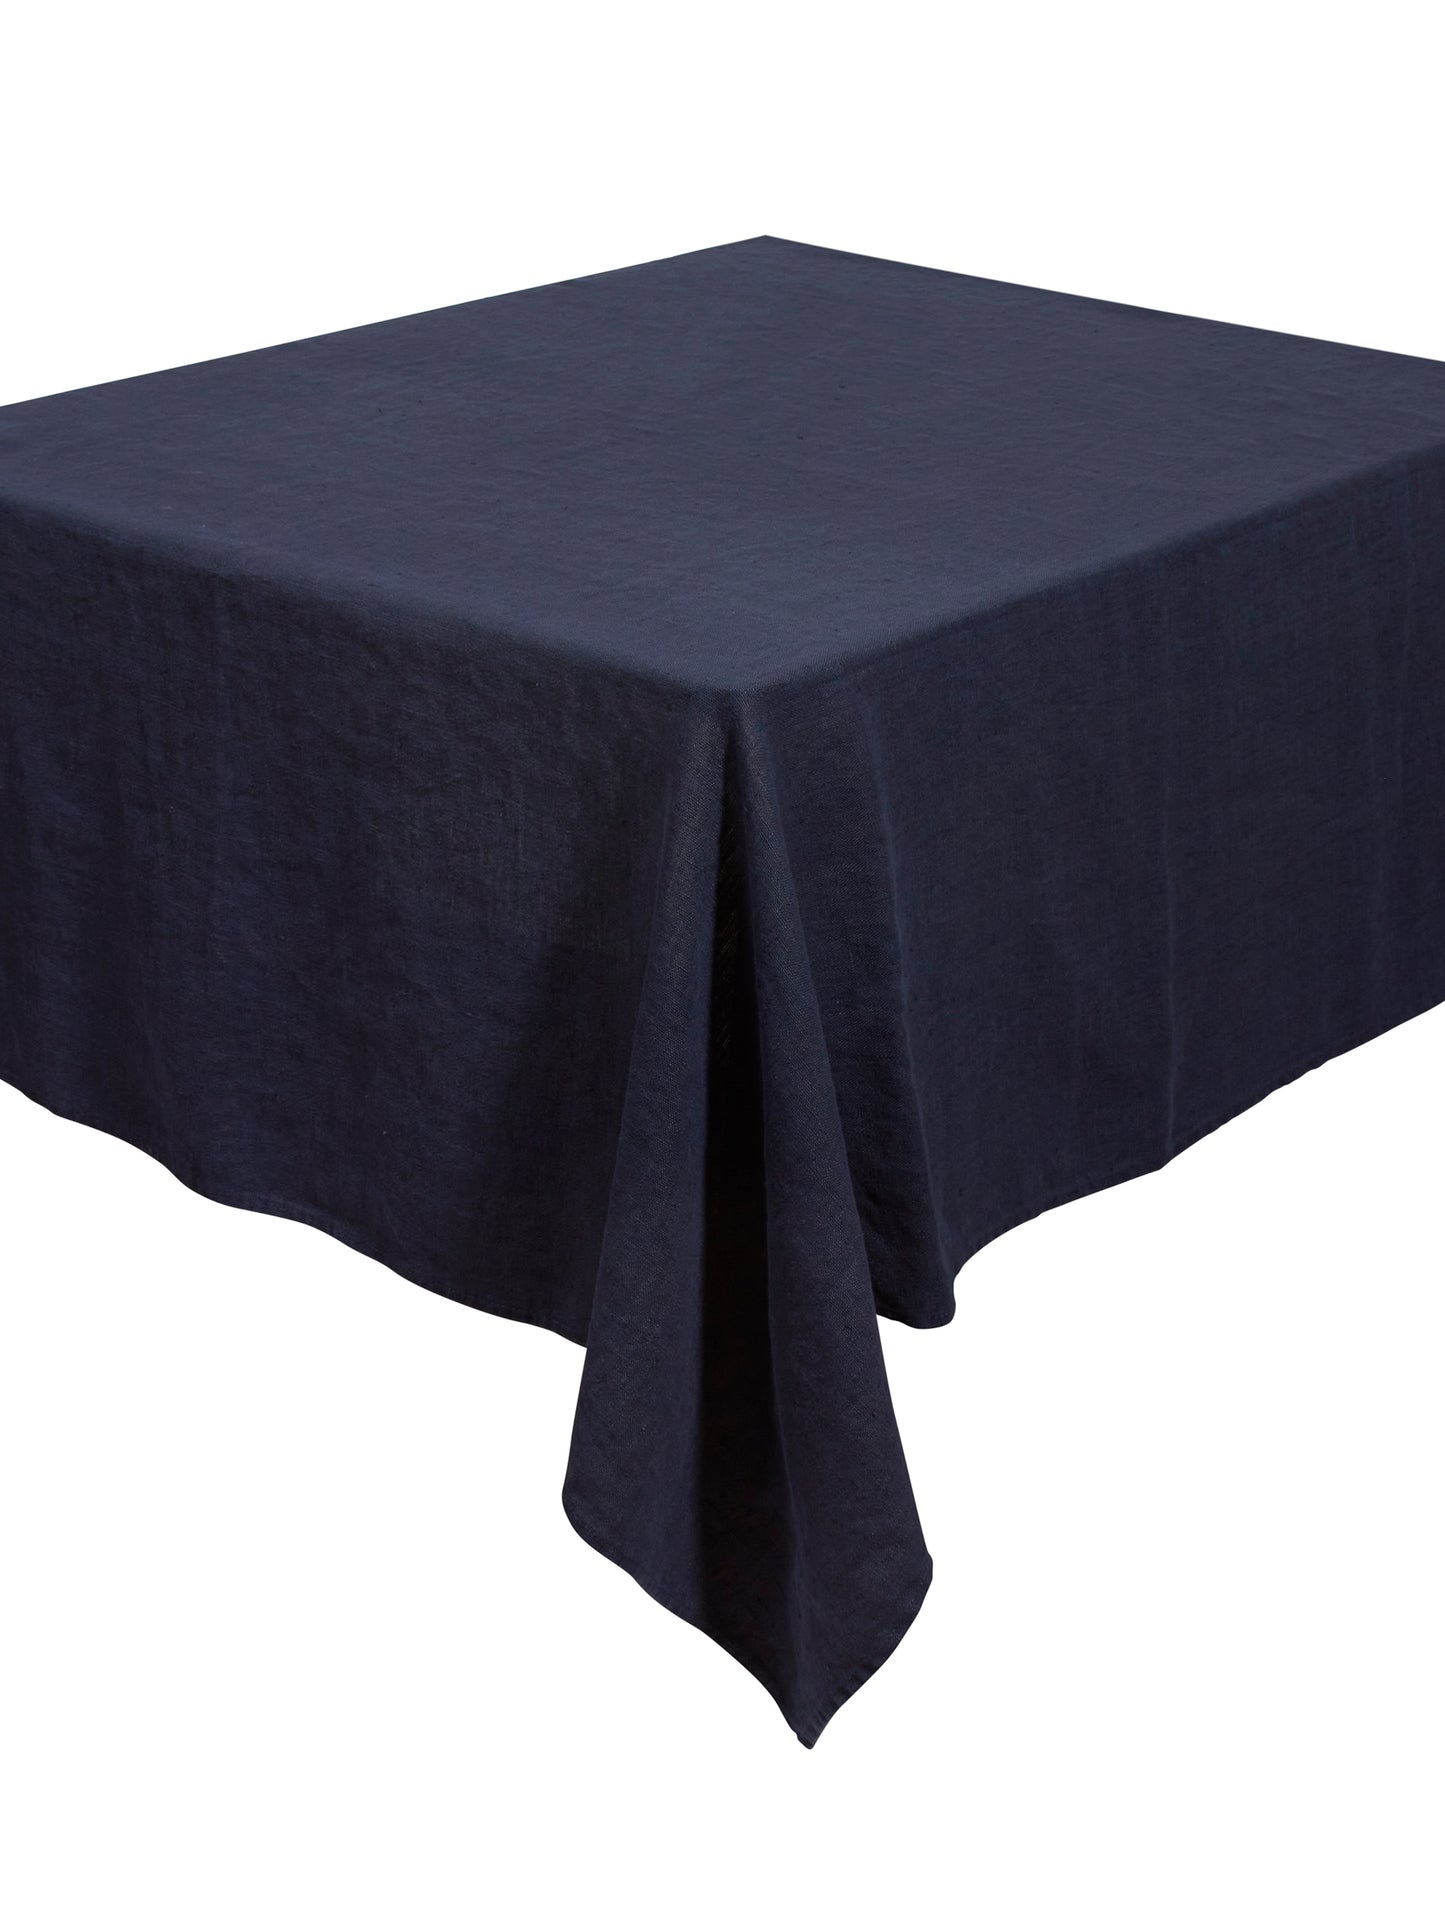 Oxford Fringe Linen Collection Tablecloth Weston Table